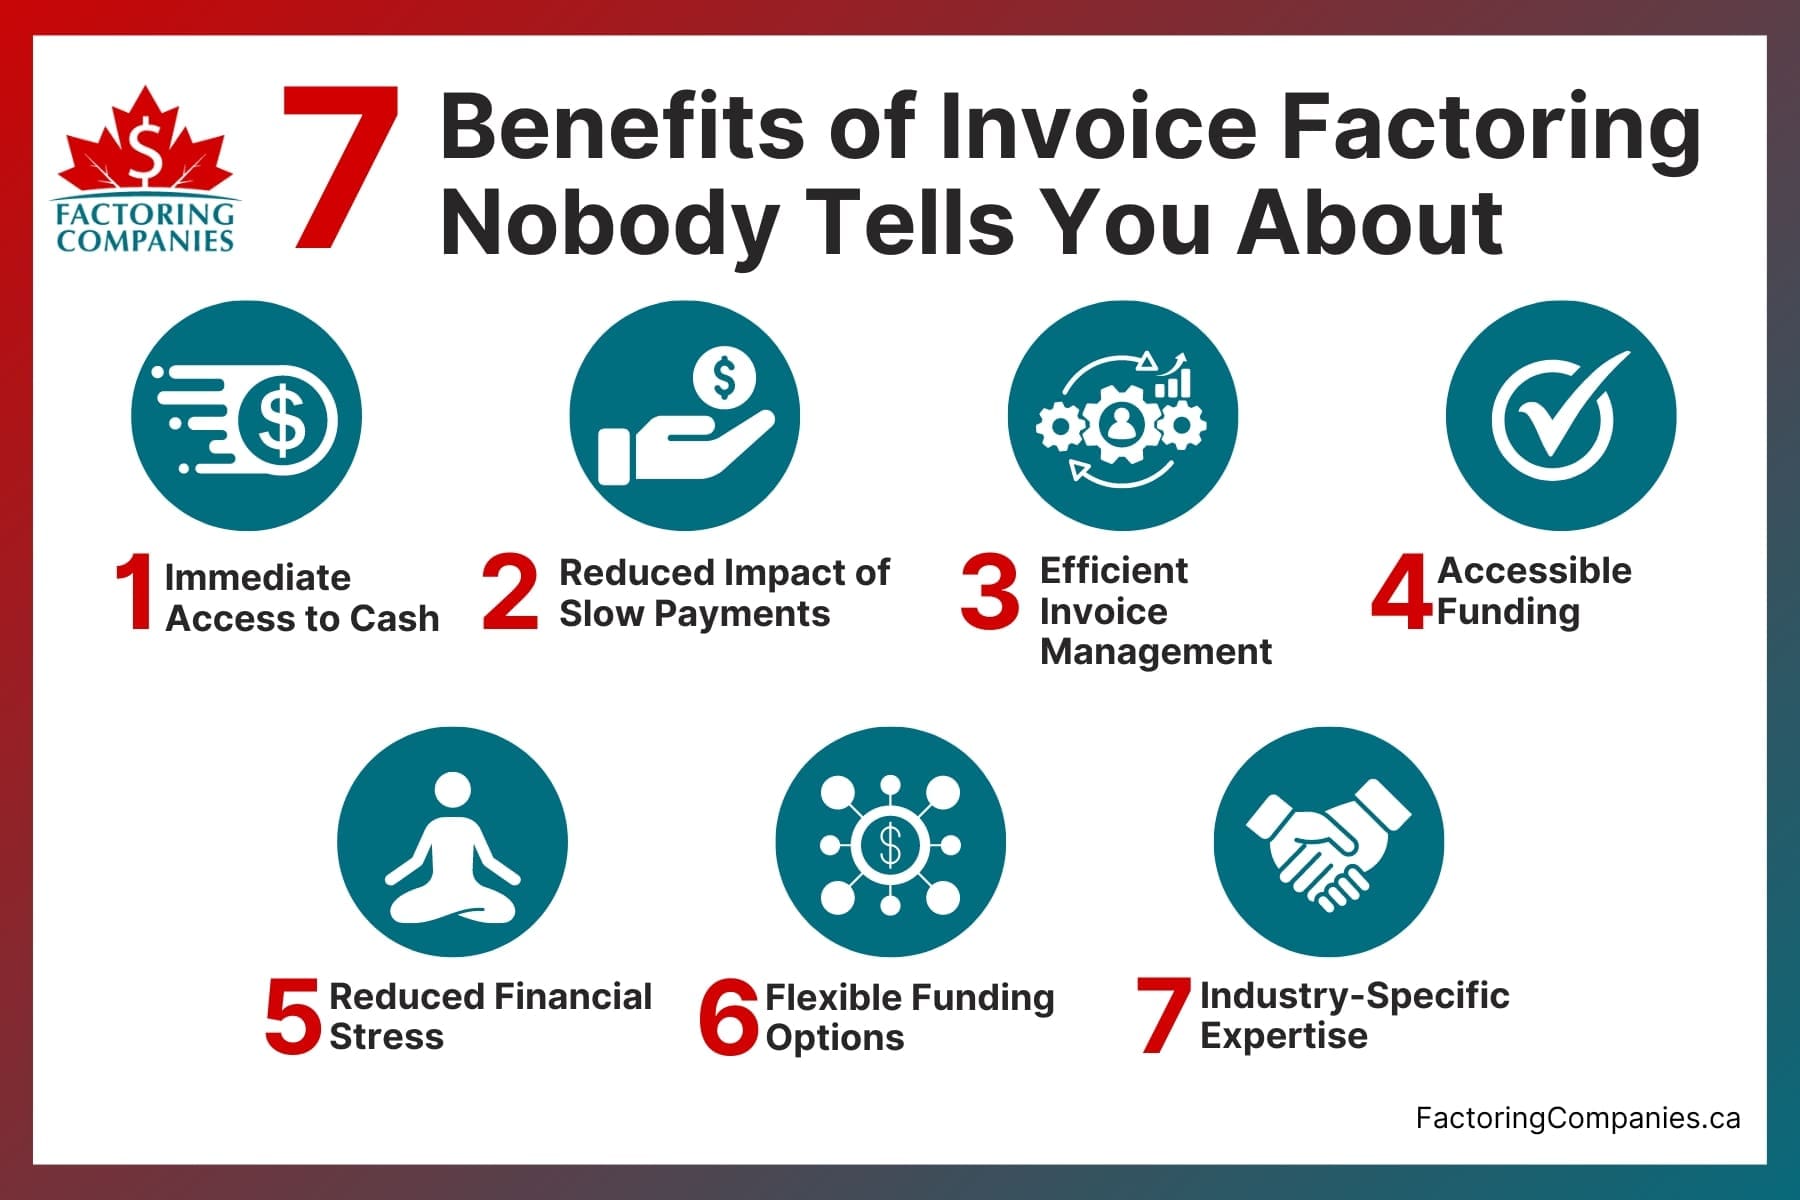 7 Benefits of Invoice Factoring Nobody Tells You About